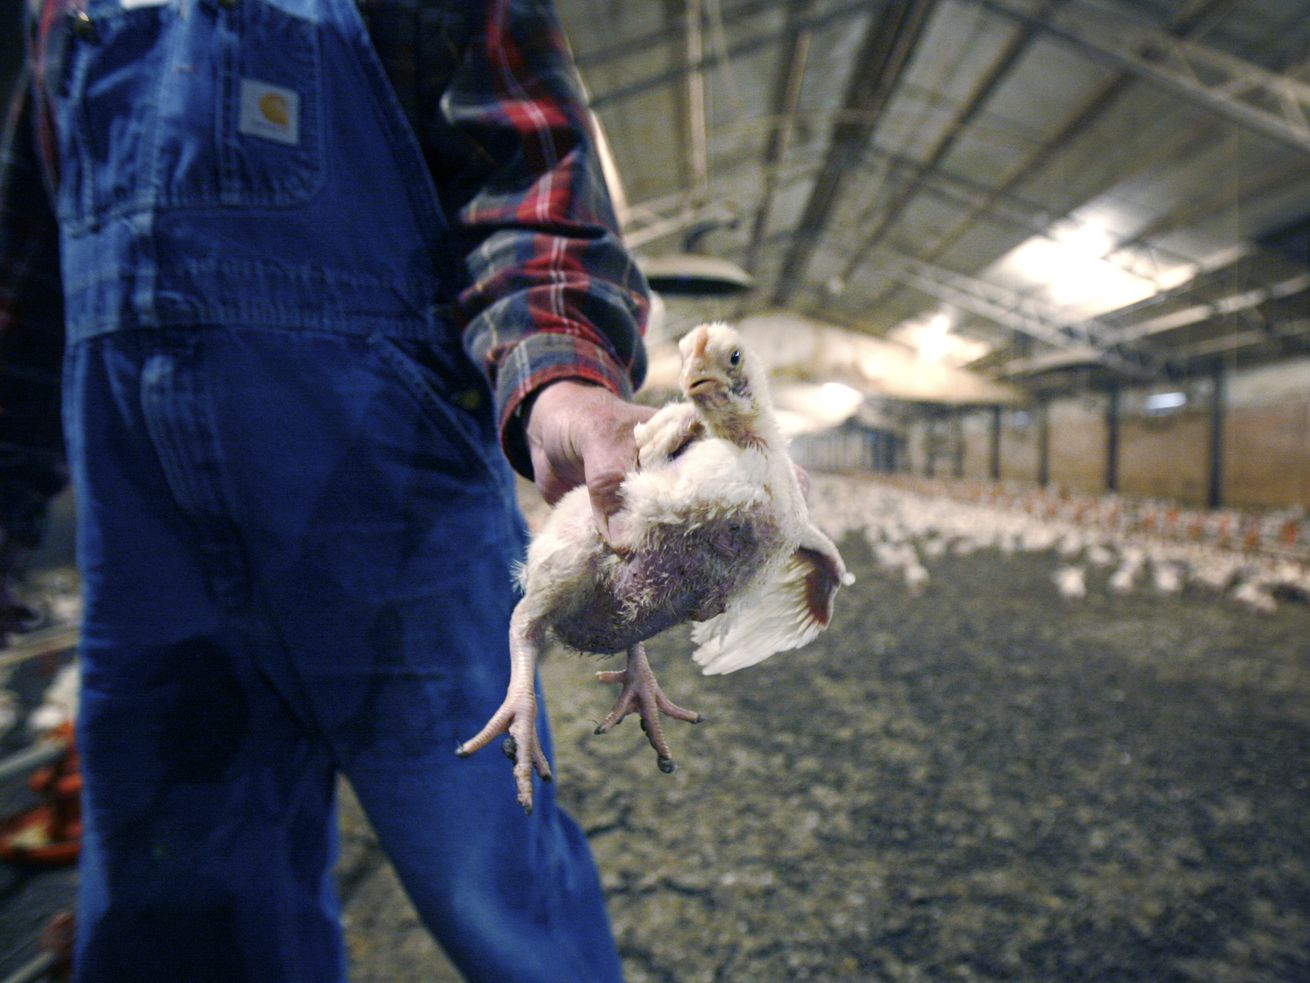 A chicken farmer is in the foreground, holding a medium-sized chicken to the camera. Behind the farmer, there are a few hundred chickens in a long barn.